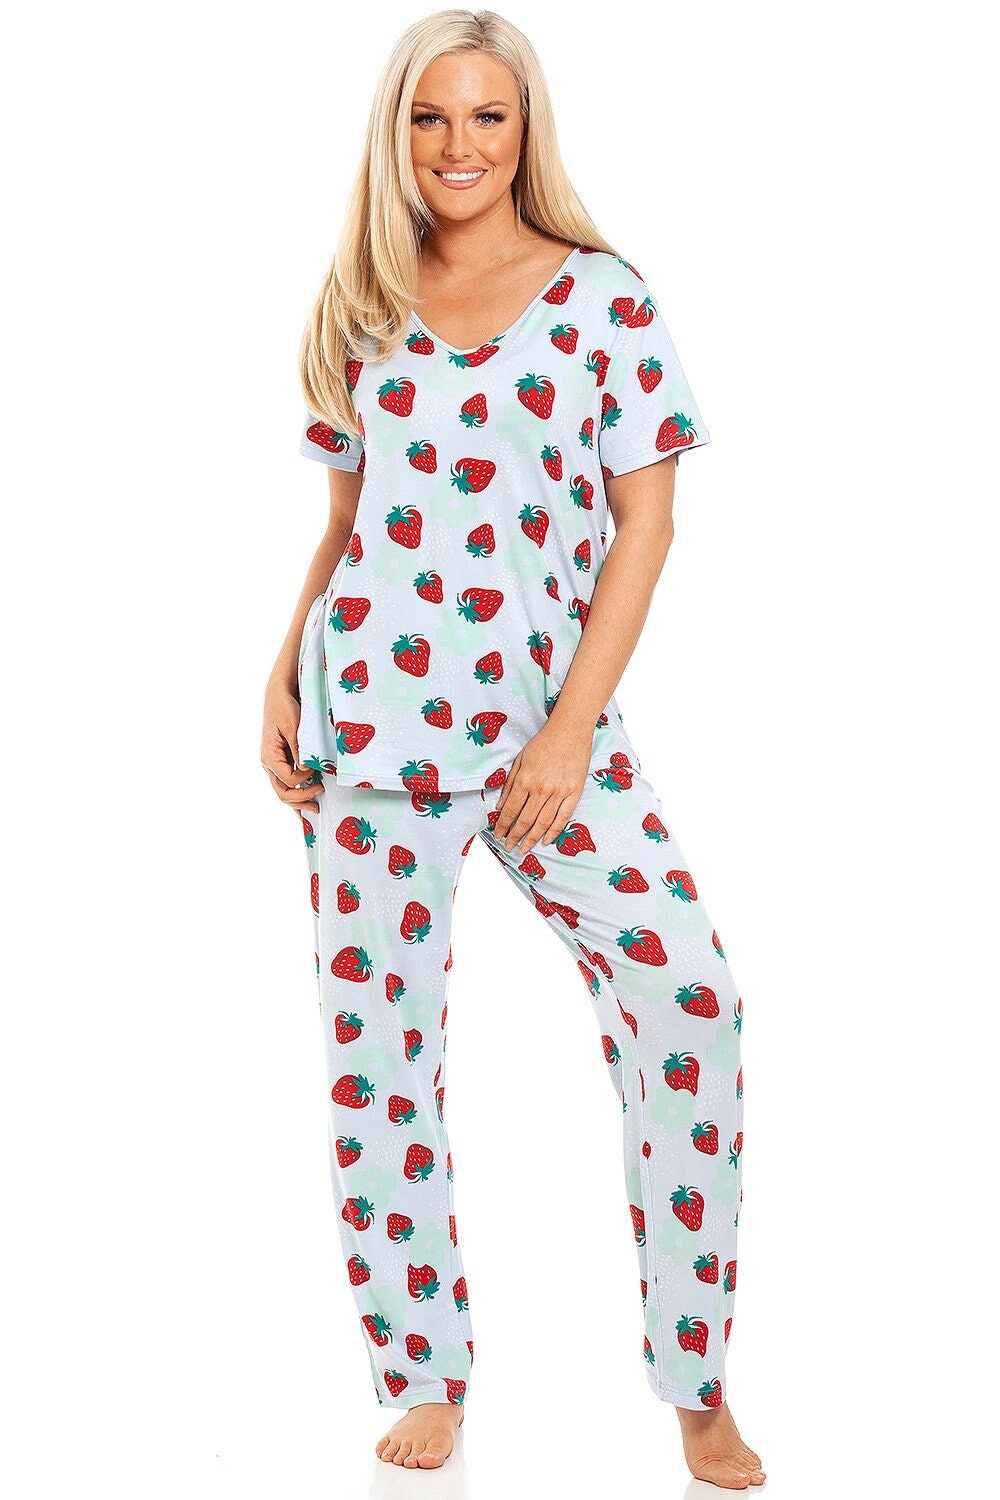 Printed Strawberry Floral Fruit Pajama Set For Women Lounge Sleepwear  Loungewear With Button Up Shirt And Pants From Jianjiacang, $20.91